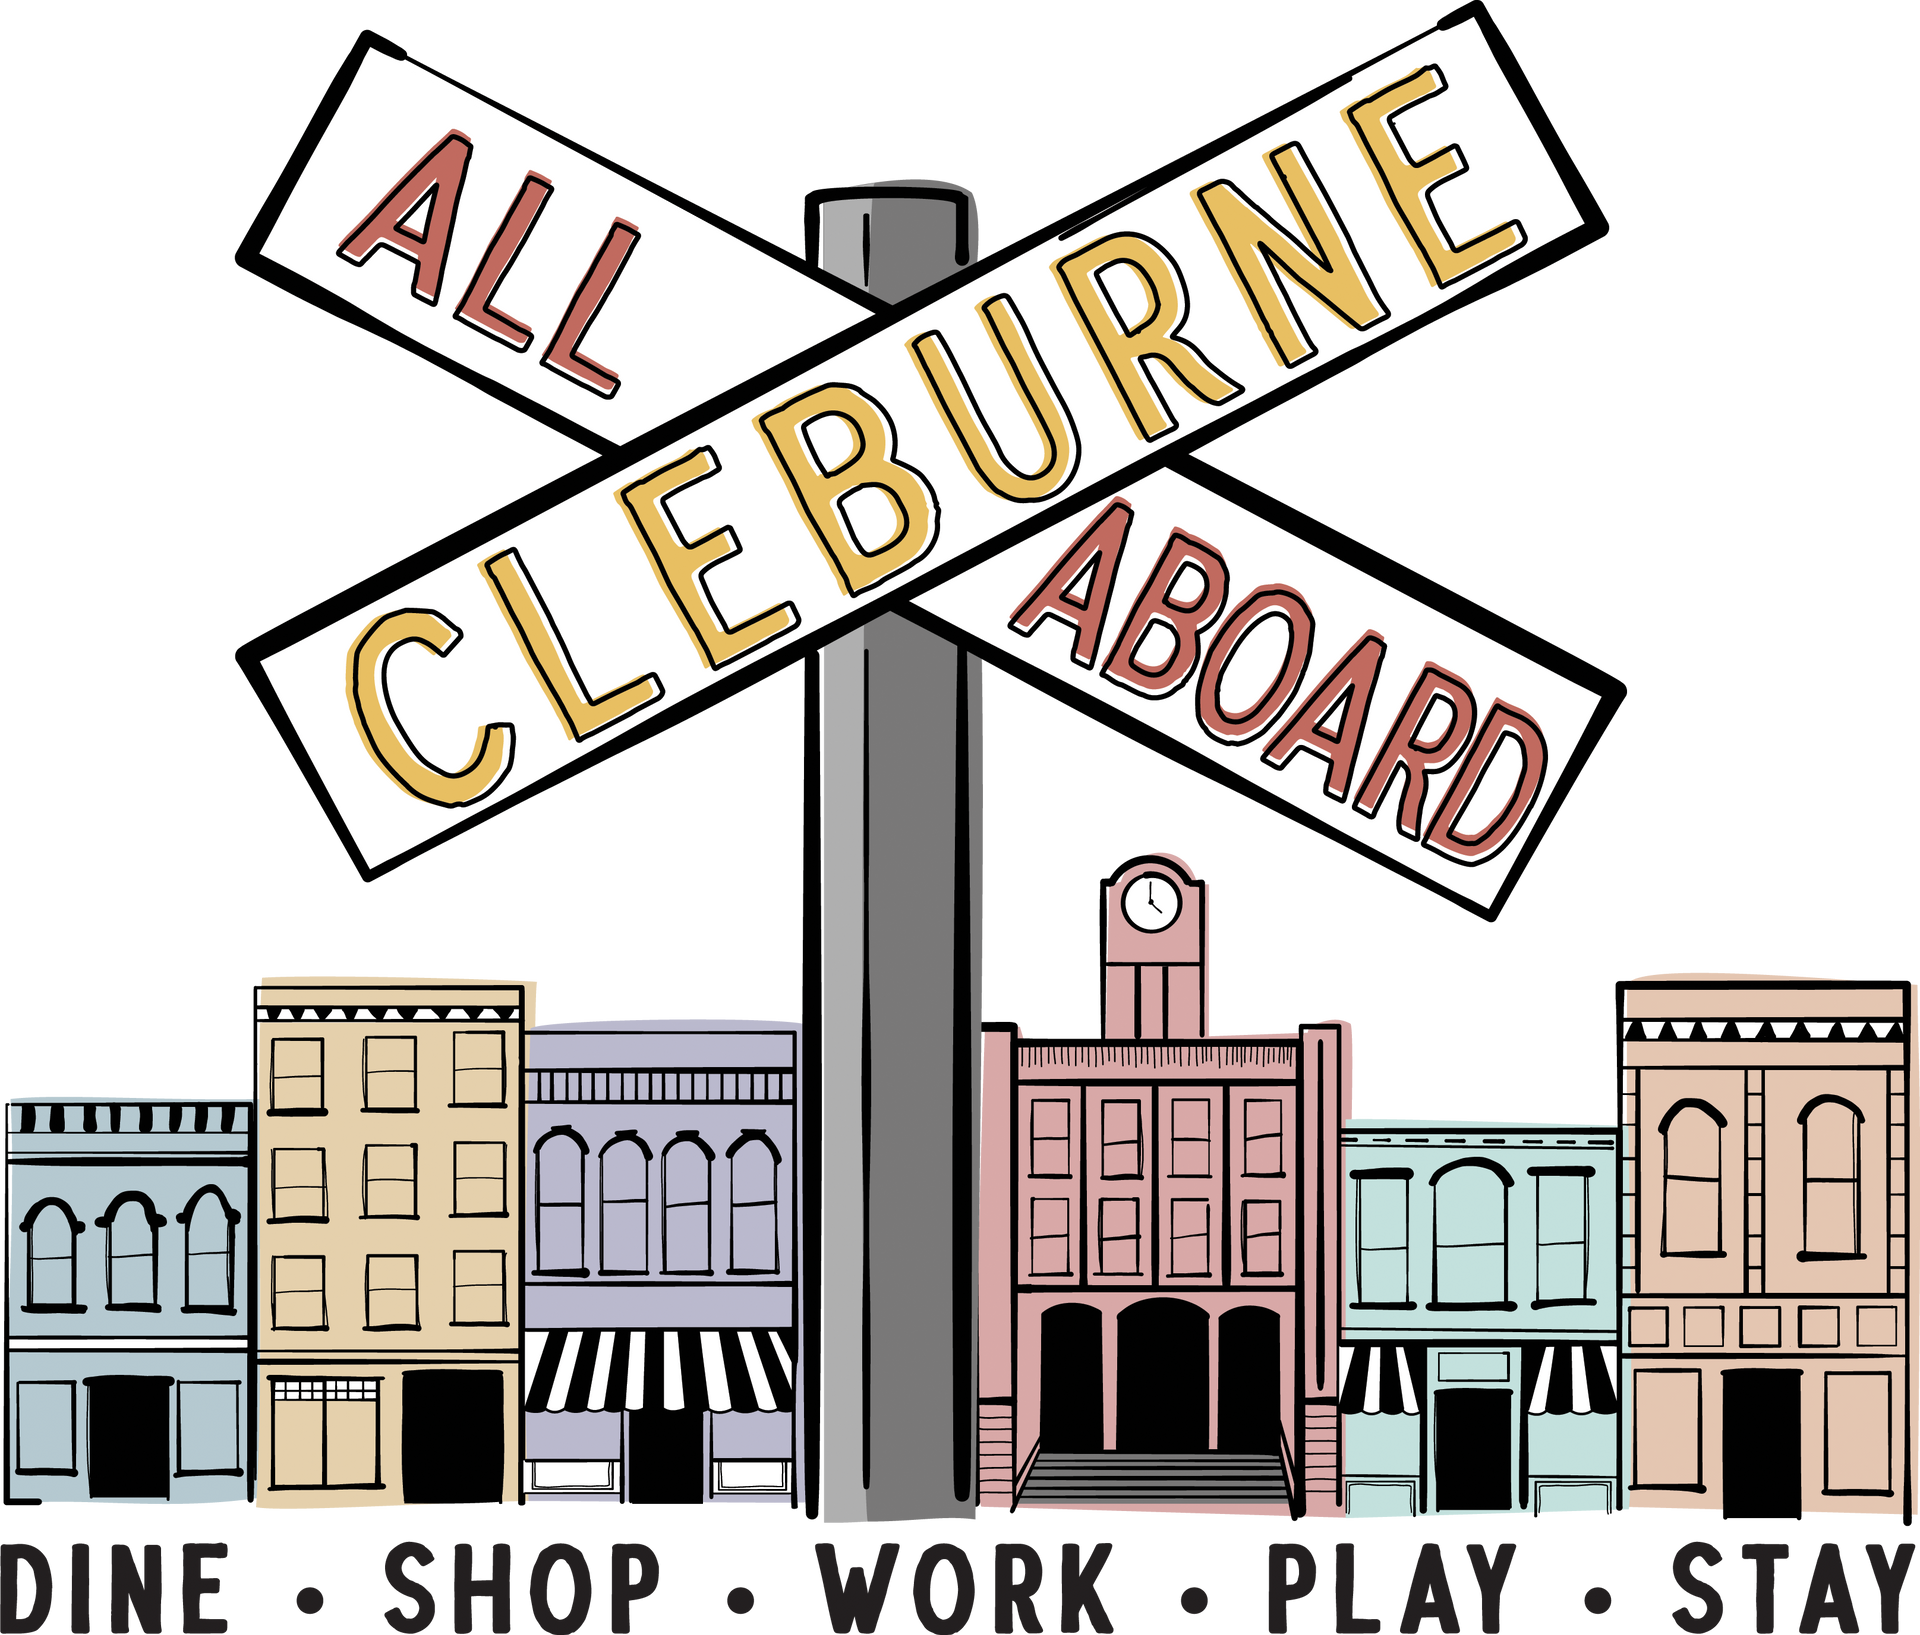 A drawing of a street sign that says all cleburne aboard